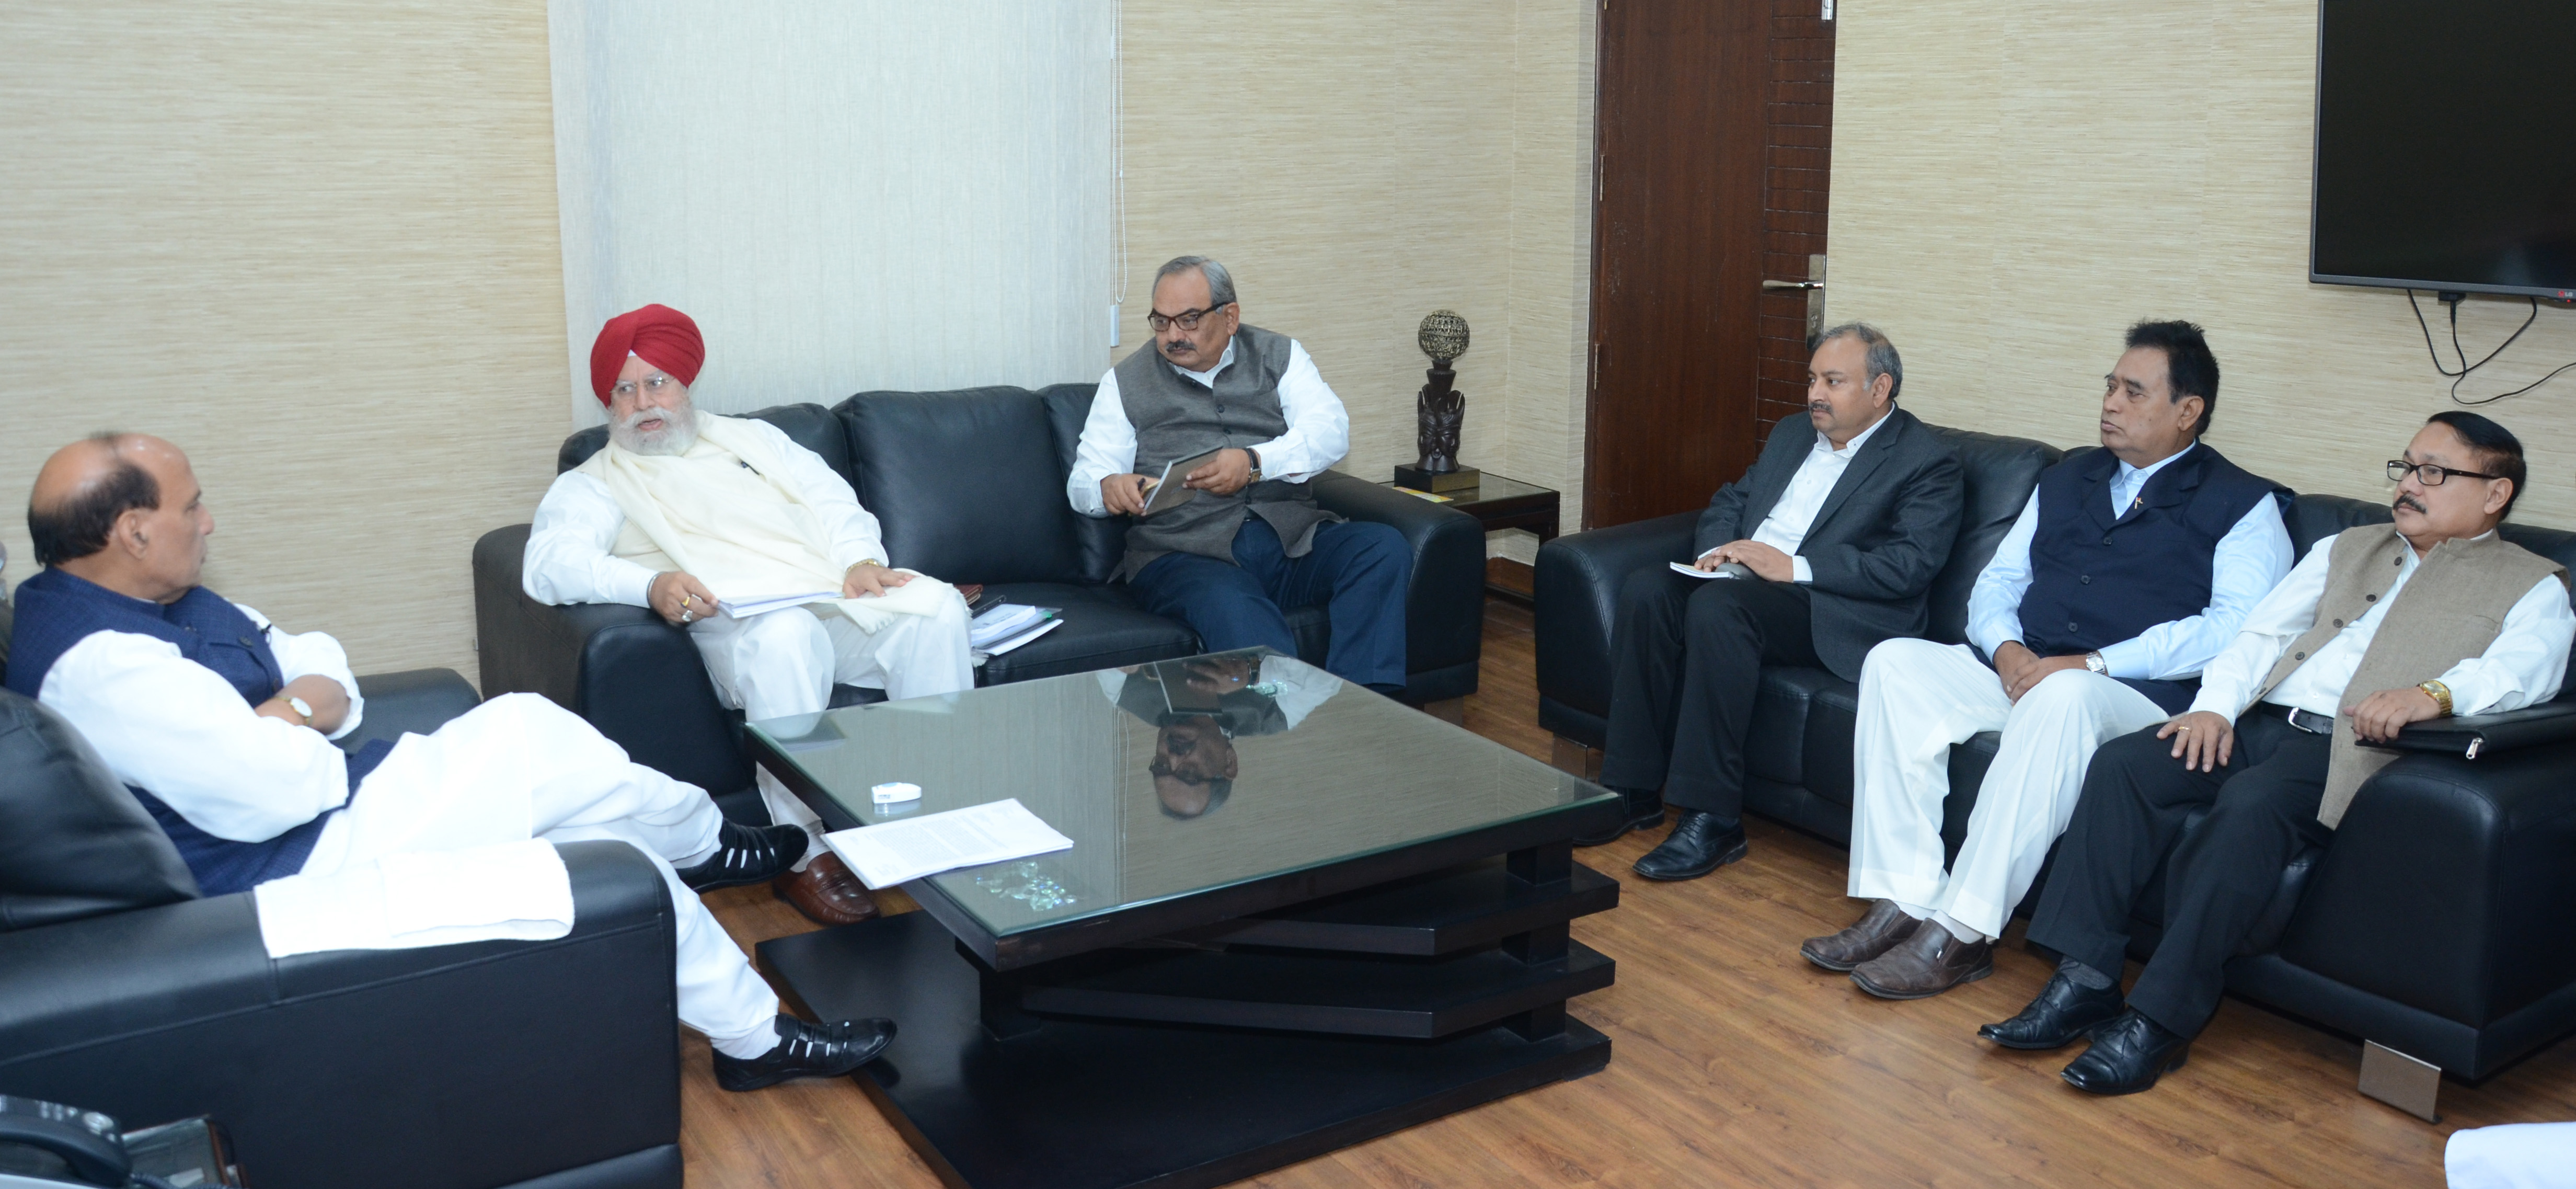 A delegation from Greater Cooch Behar Peoples Association calling on the Union Home Minister, Shri Rajnath Singh, in New Delhi on December 11, 2015. The Member of Parliament from Darjeeling in West Bengal, Shri S.S. Ahluwalia and the Secretary, Ministry of Home Affairs, Shri Rajiv Mehrishi are also seen.